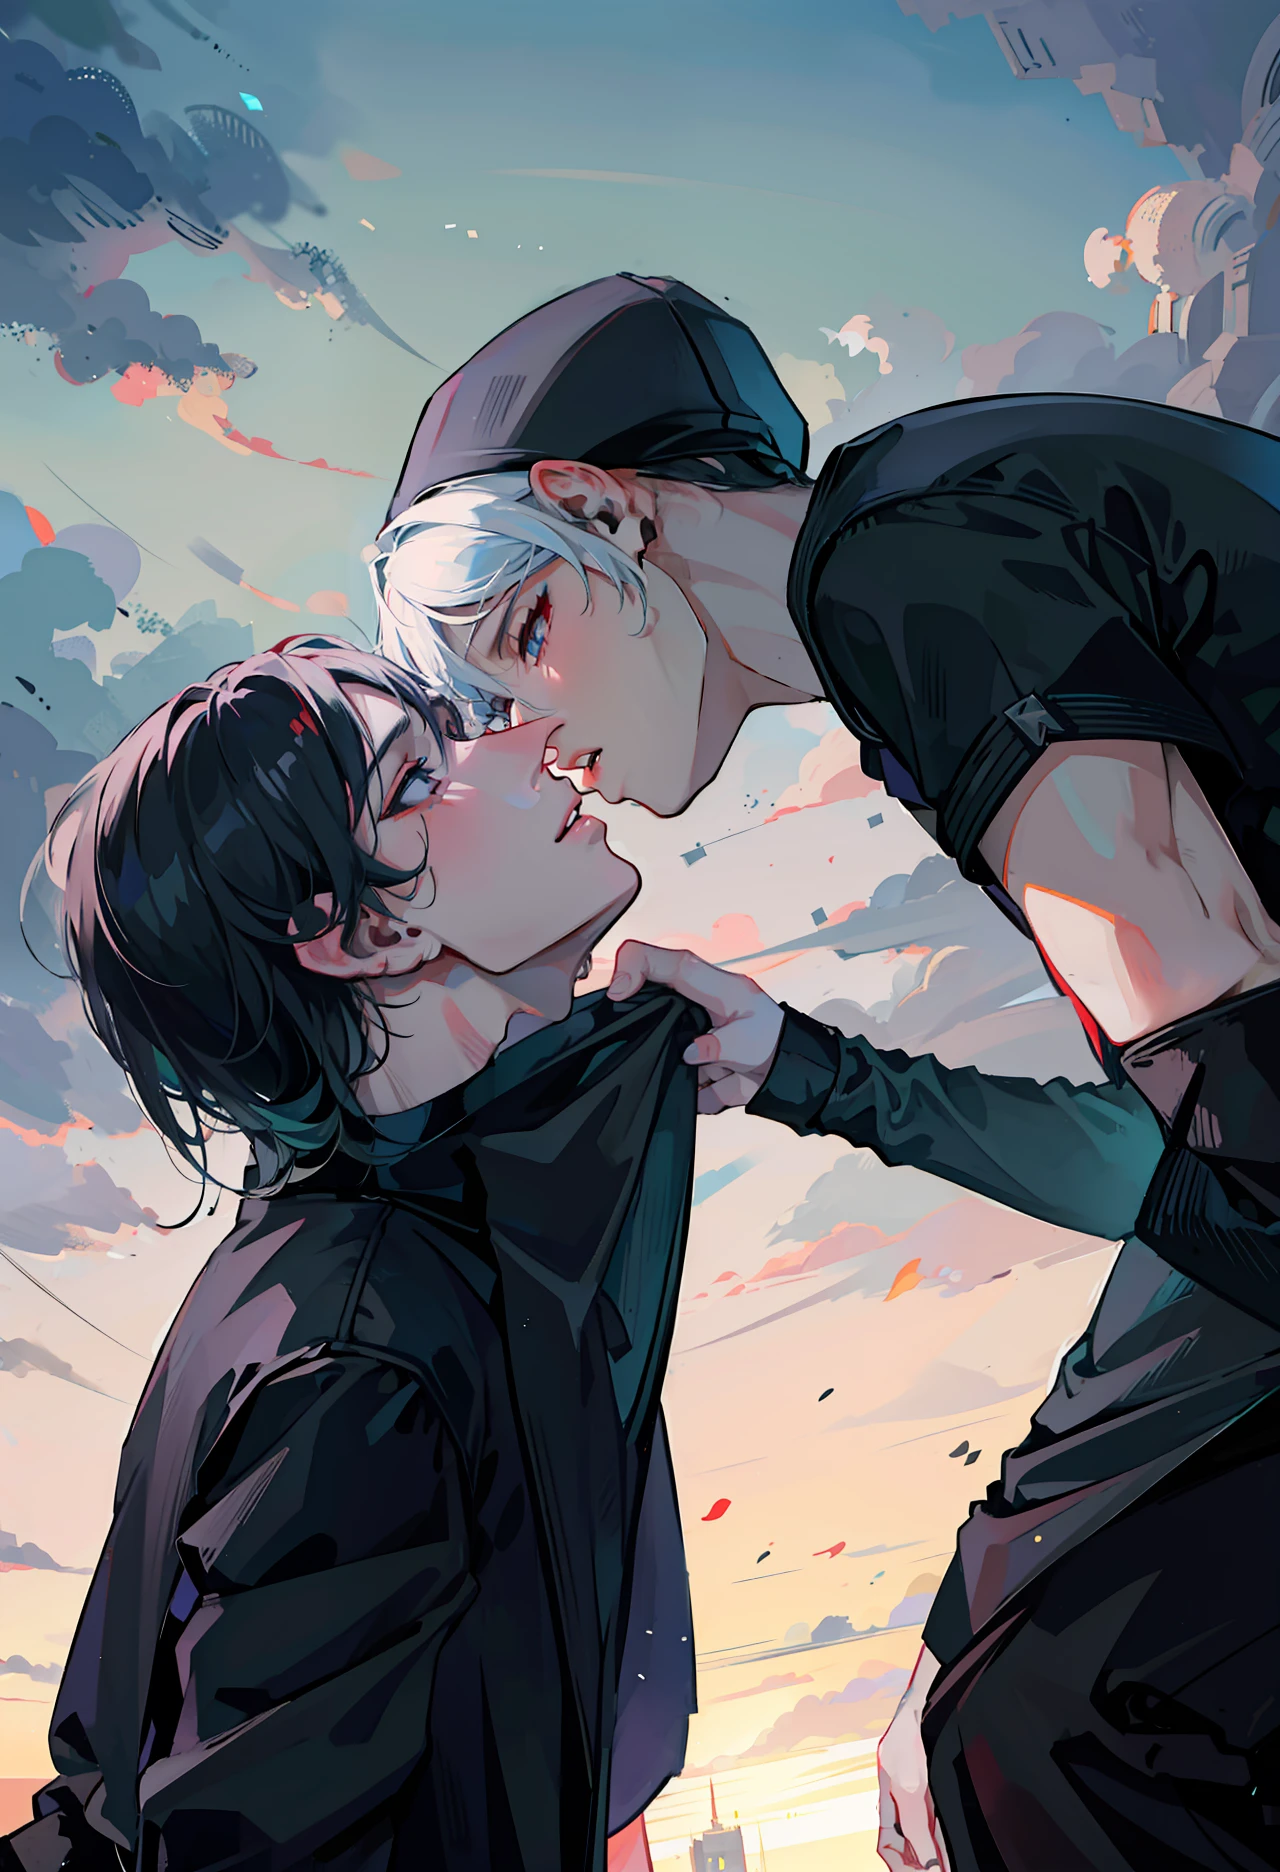 Two nena kissing, men kiss men, black clothes, Wearing black outfit, besándose lindamente, Yaoi, besándose, enfrentándose, besándose juntos, in love, Taejune, besándose boca a boca, chico rubio y chico pelirrojo, (((masterpiece))), artstation style, anime, boyslove, two boys, two mans, boys love, homosexual, 4k,8k,16k,uhd, shorts hair, city landscape, city lights in the background